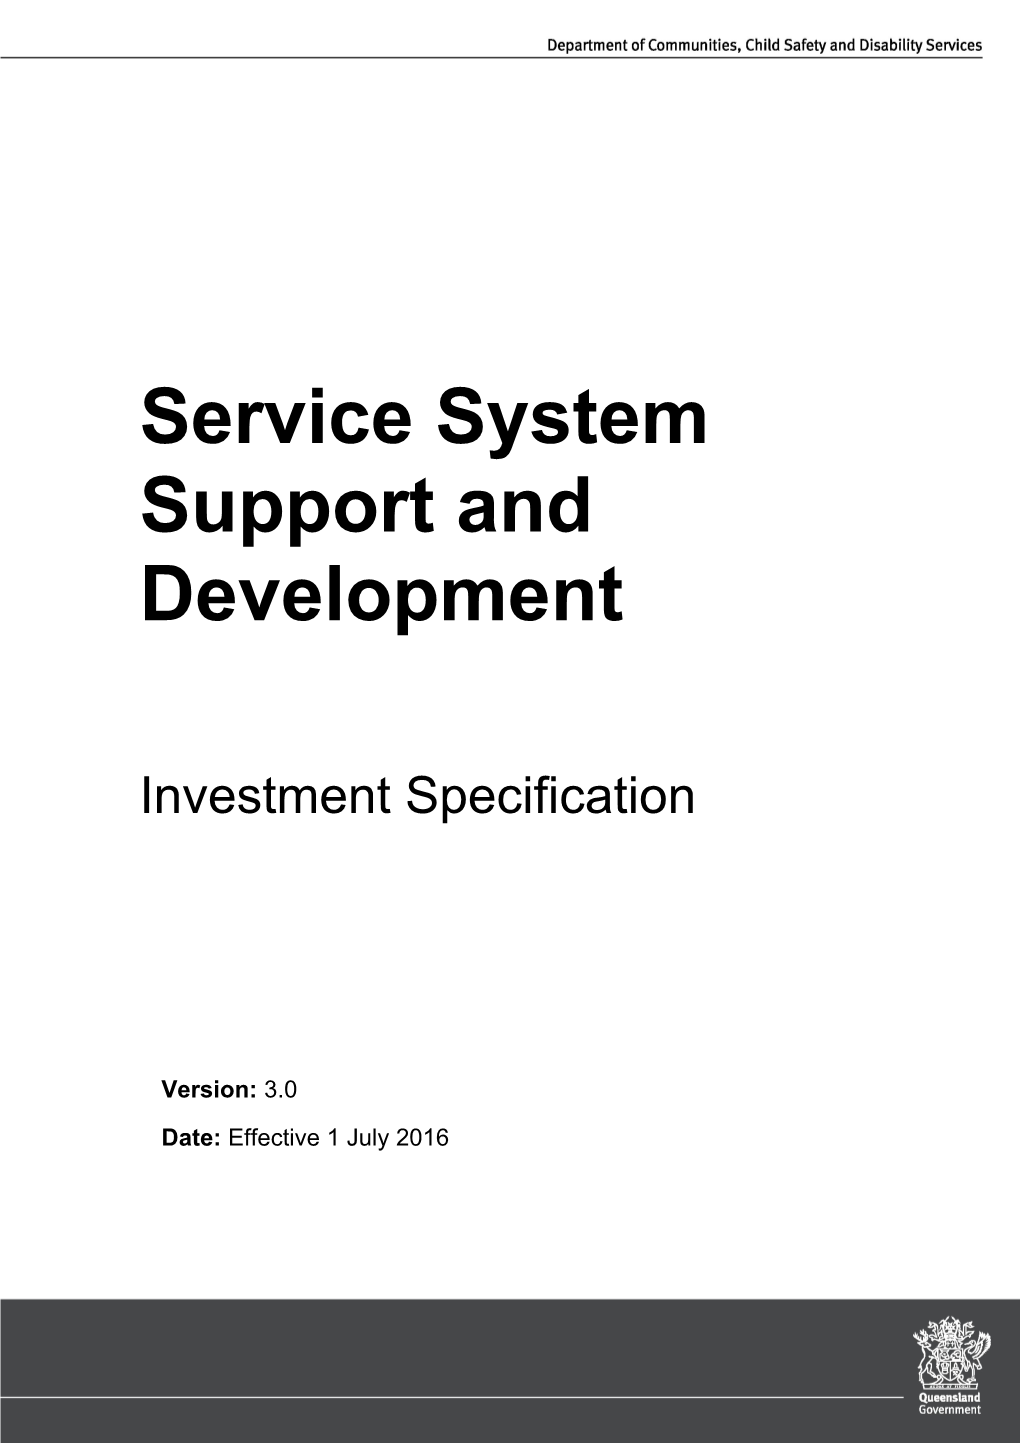 Service System Support and Development Investment Specification